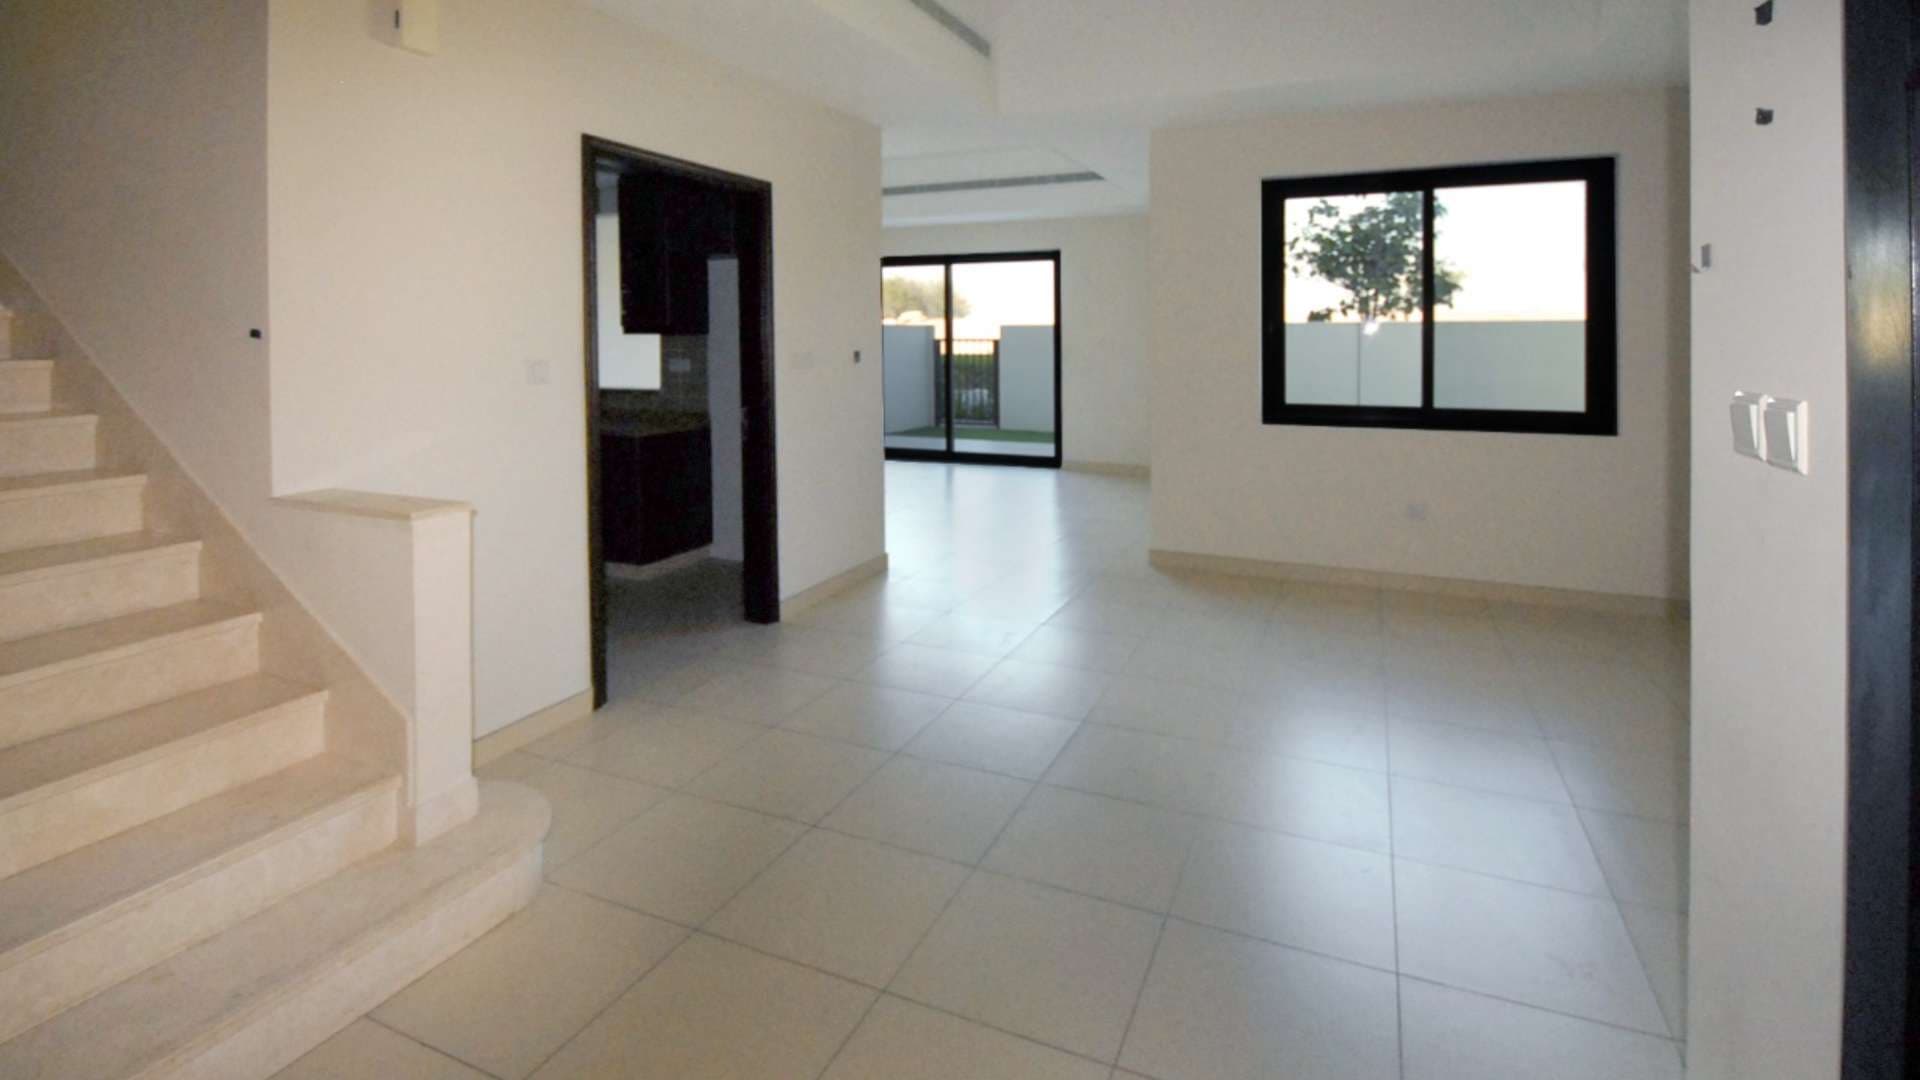 4 Bedroom Townhouse For Sale Mira Lp07487 2bcfc56fa23ad600.jpeg